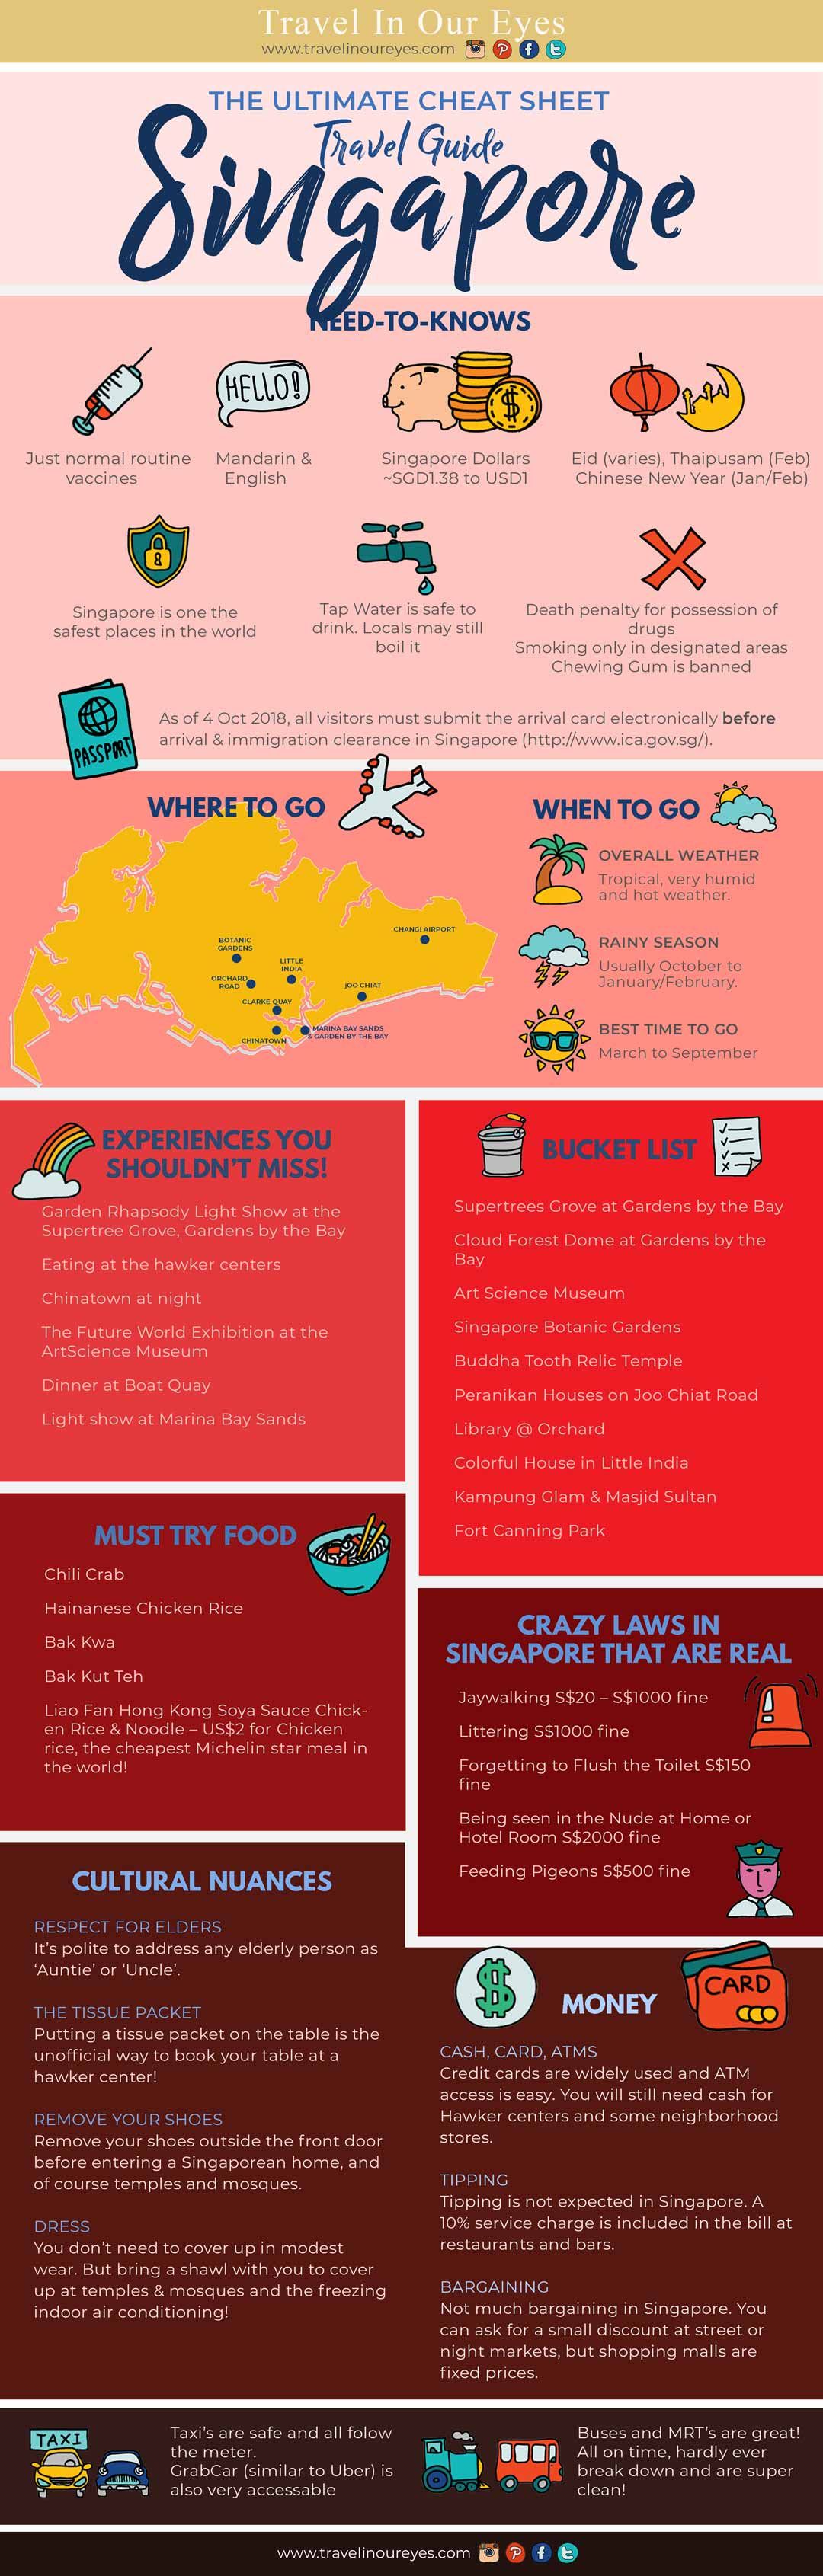 Ultimate Singapore Travel Guide Infographic - Travel In Our Eyes